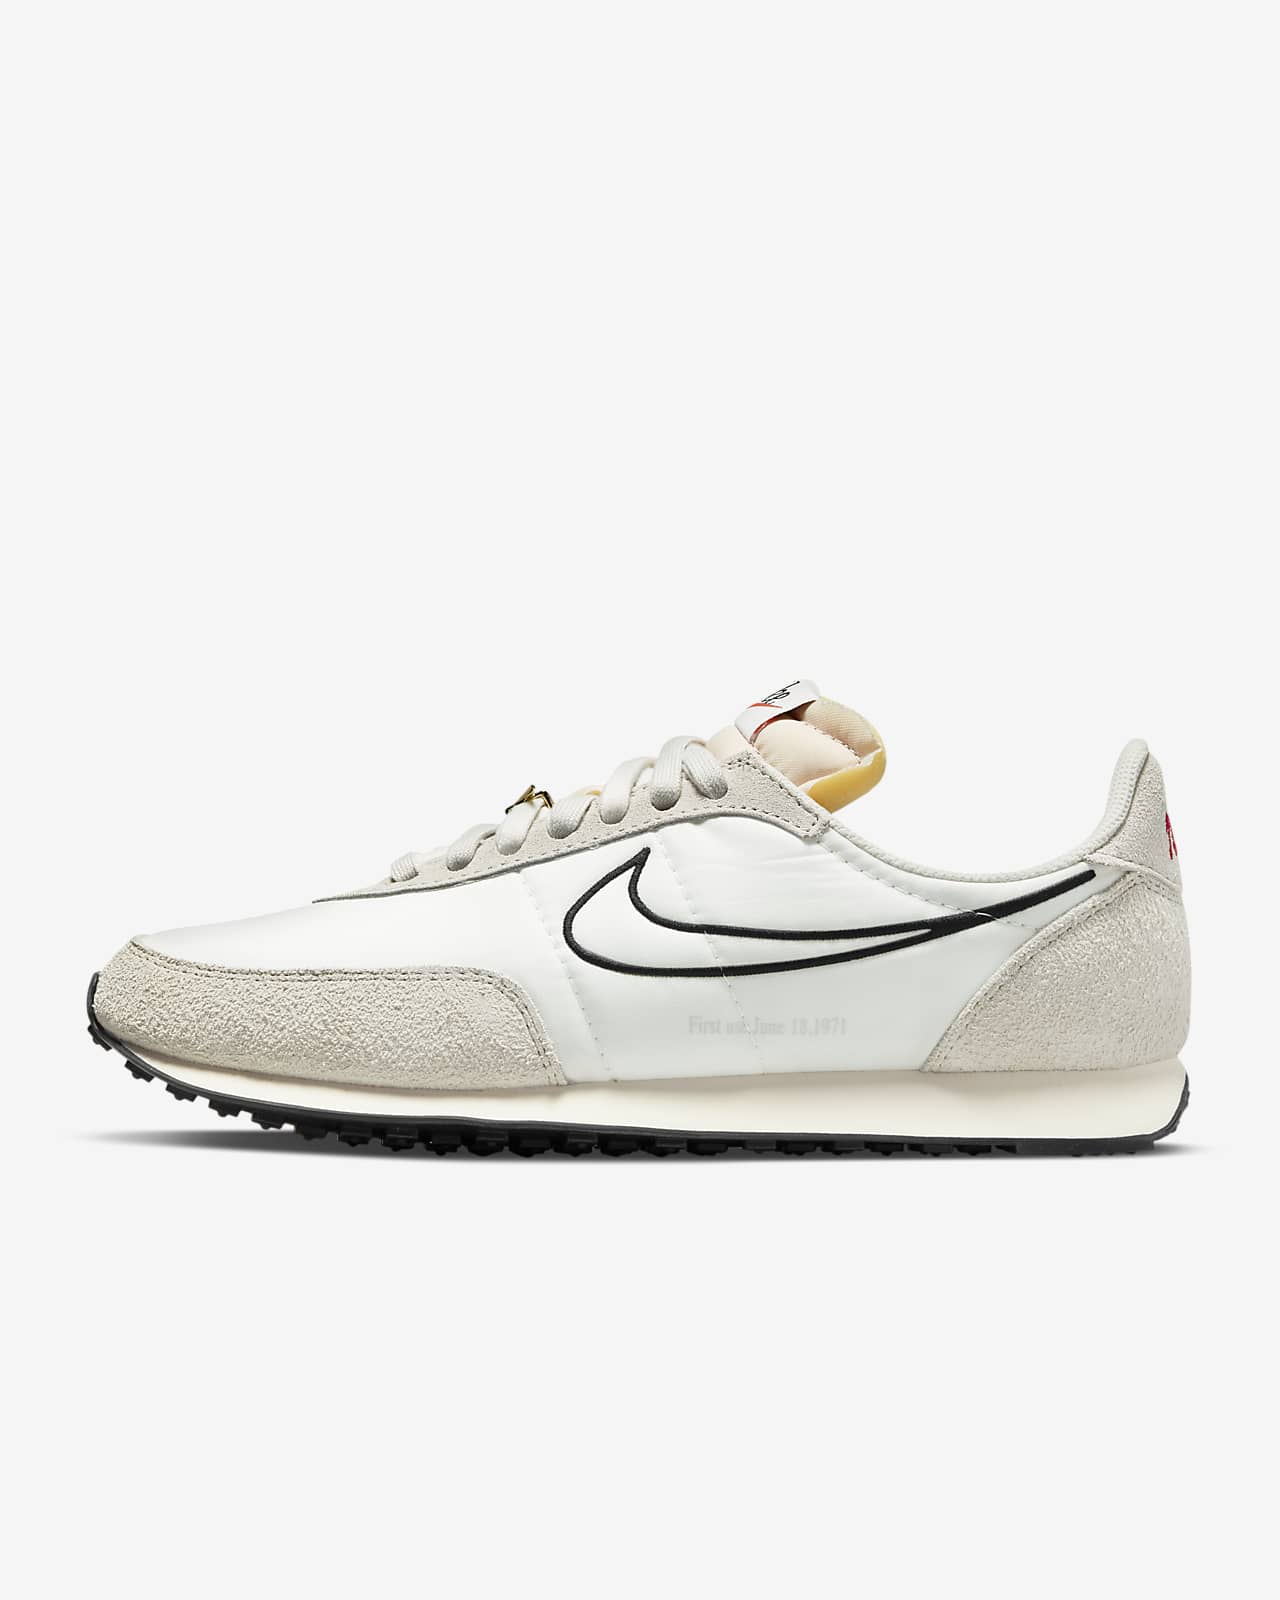 Chaussure Nike Waffle Trainer 2 pour Homme